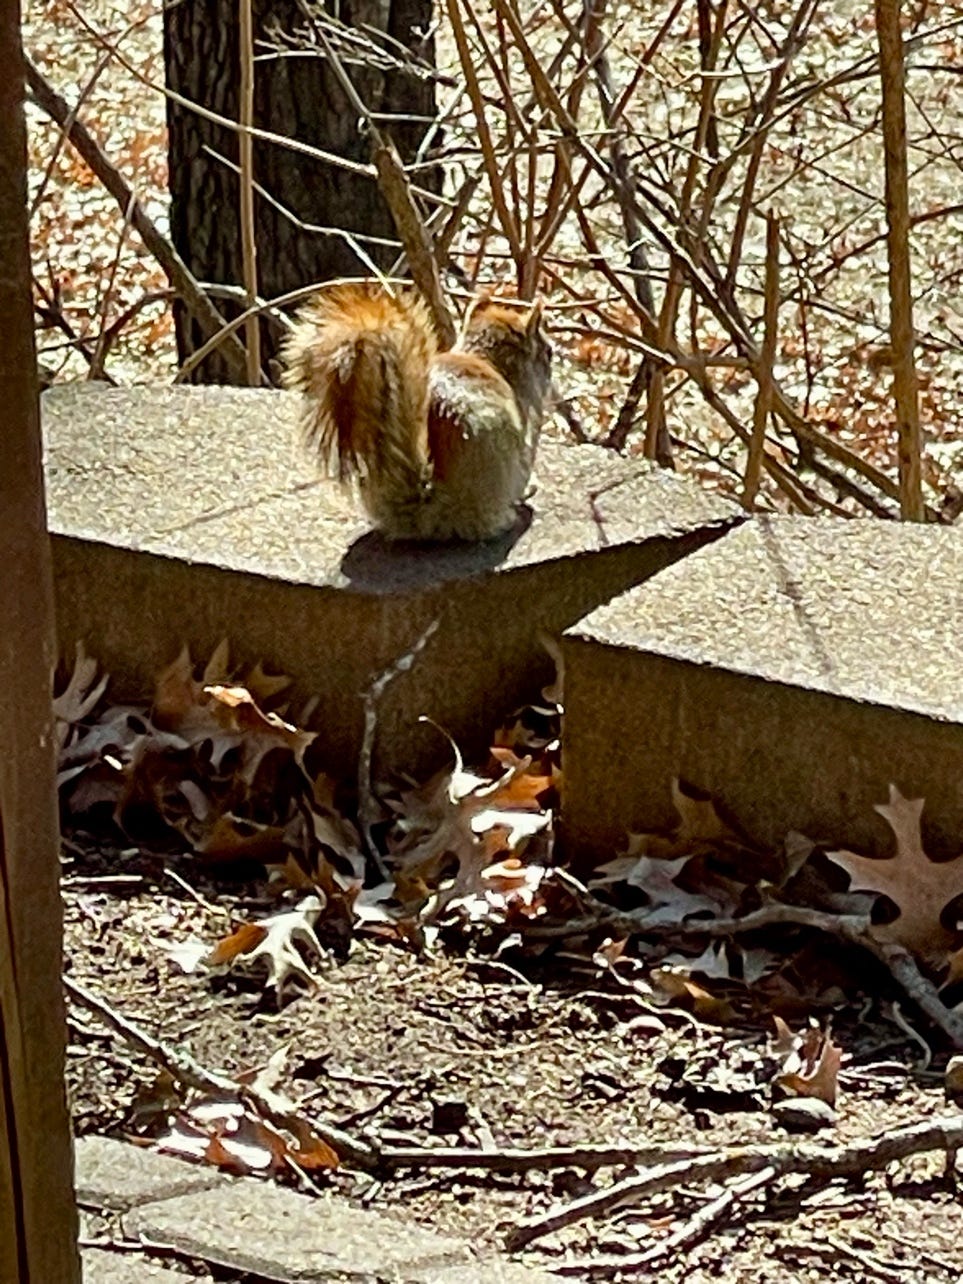 A squirrel on a stone ledge

Description automatically generated